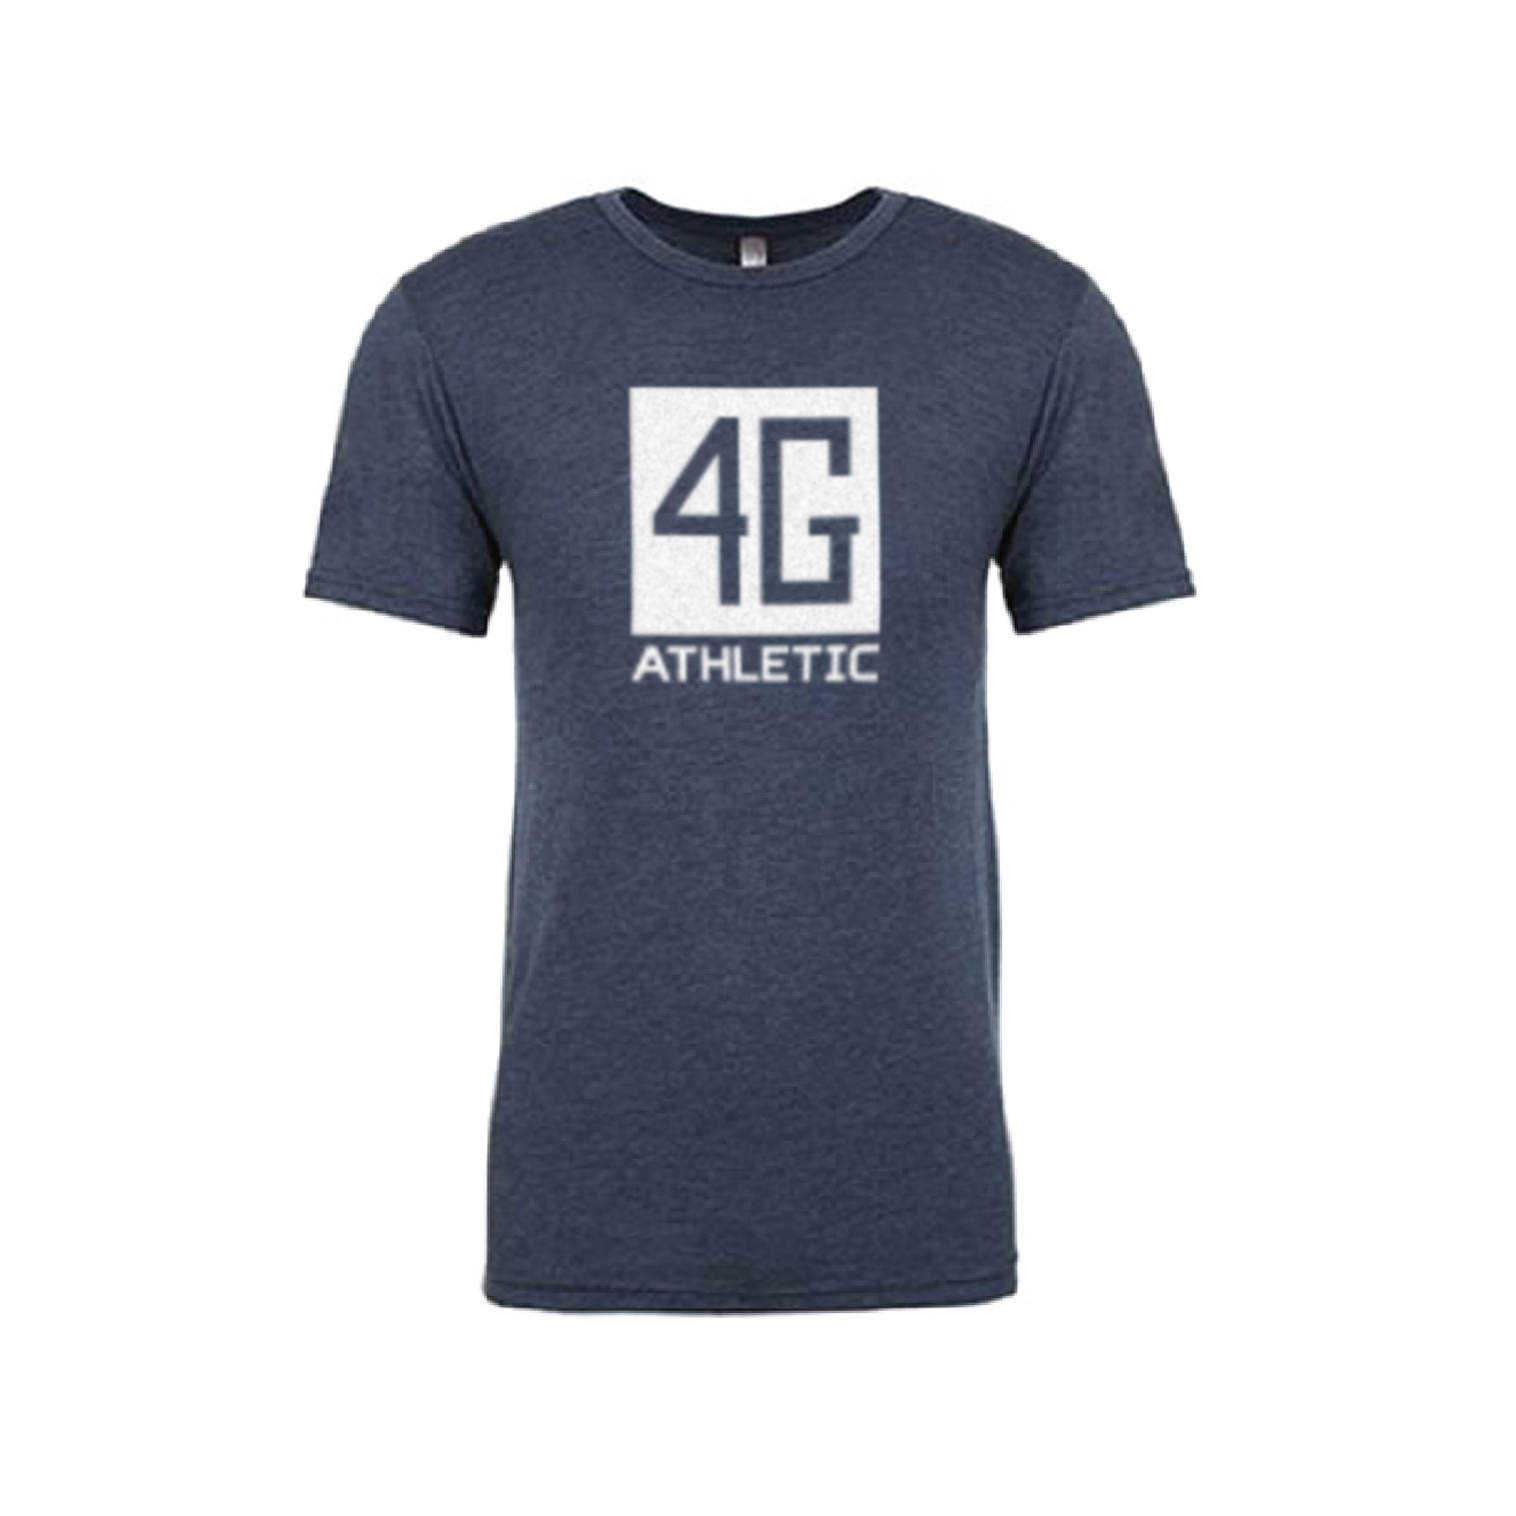 Tshirt from Men\'s 4G Athletic for sale Blue